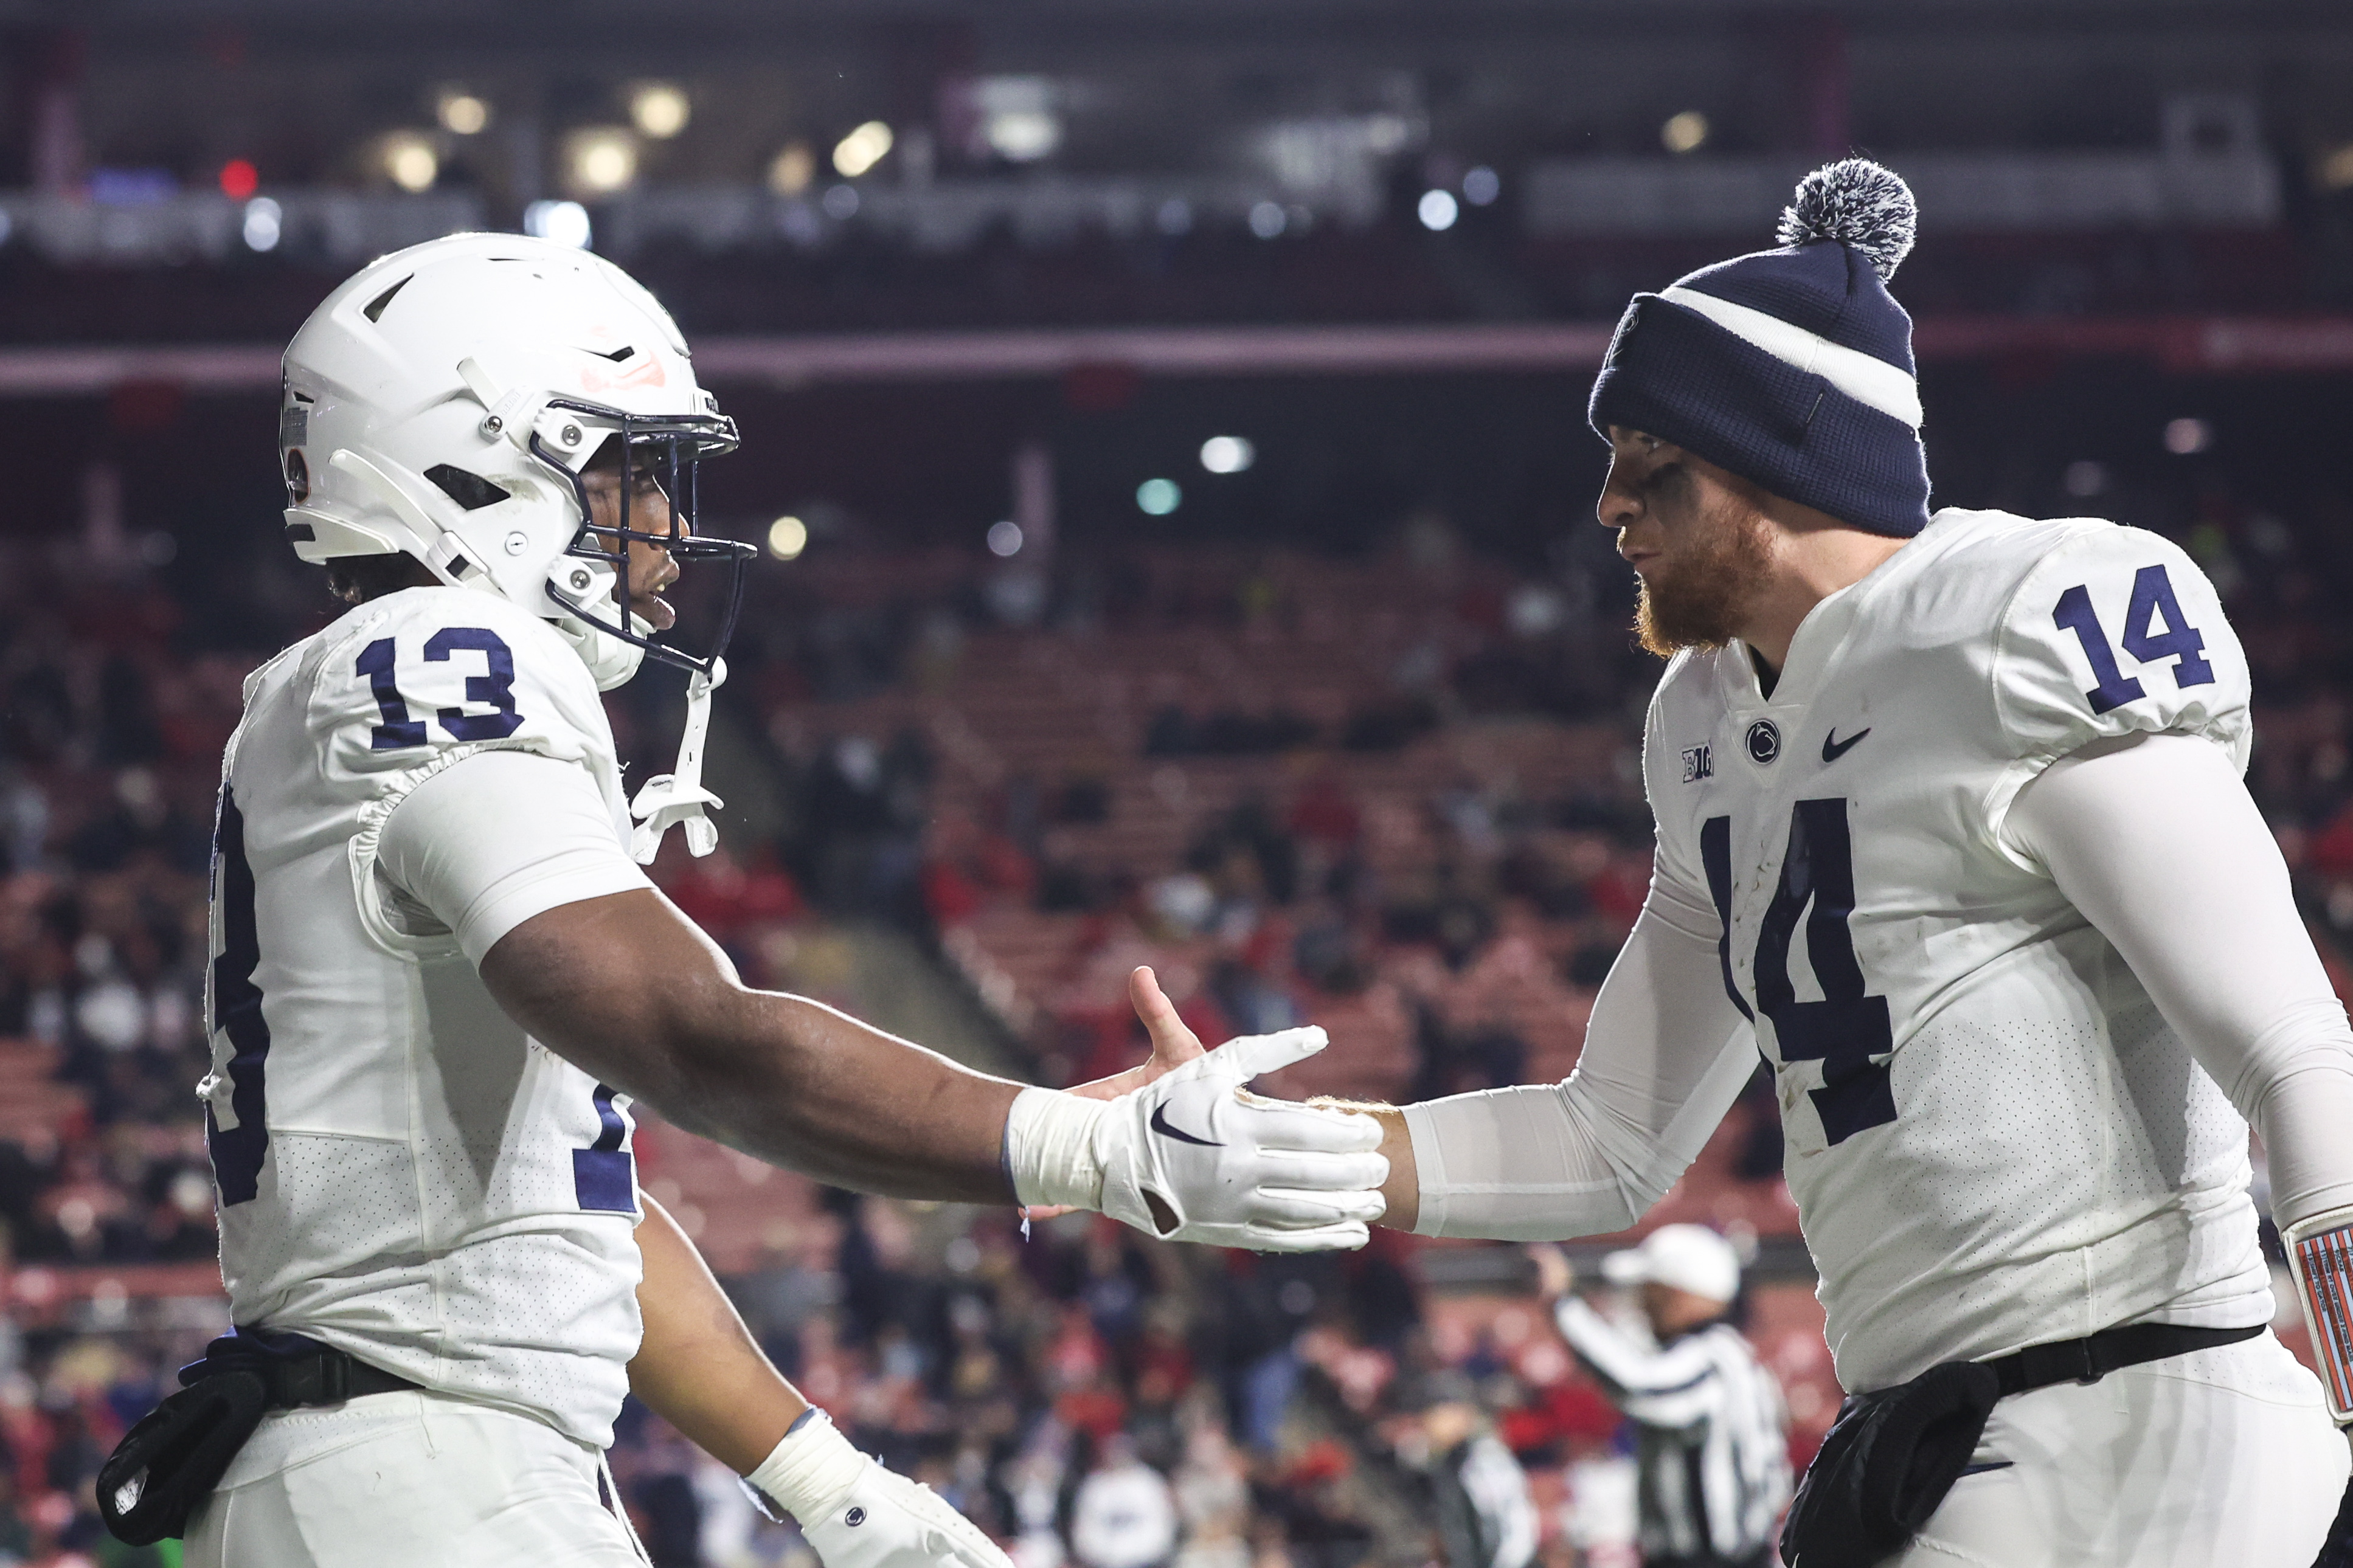 Penn State Bowl Projections What Bowl Is Penn State Going To? Sports